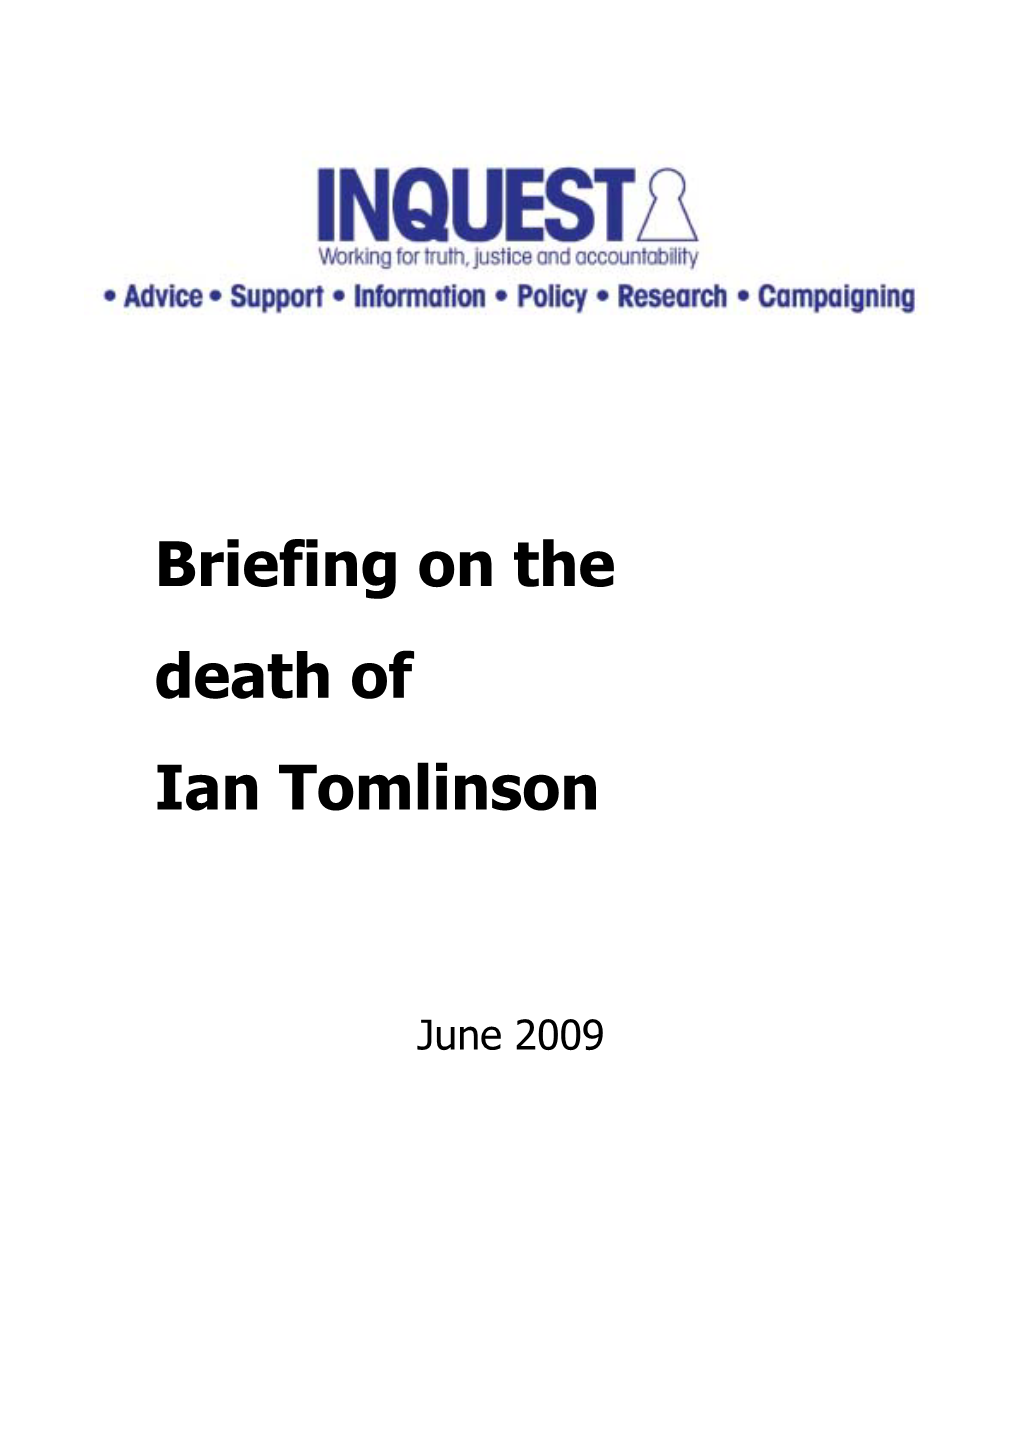 Briefing on the Death of Ian Tomlinson